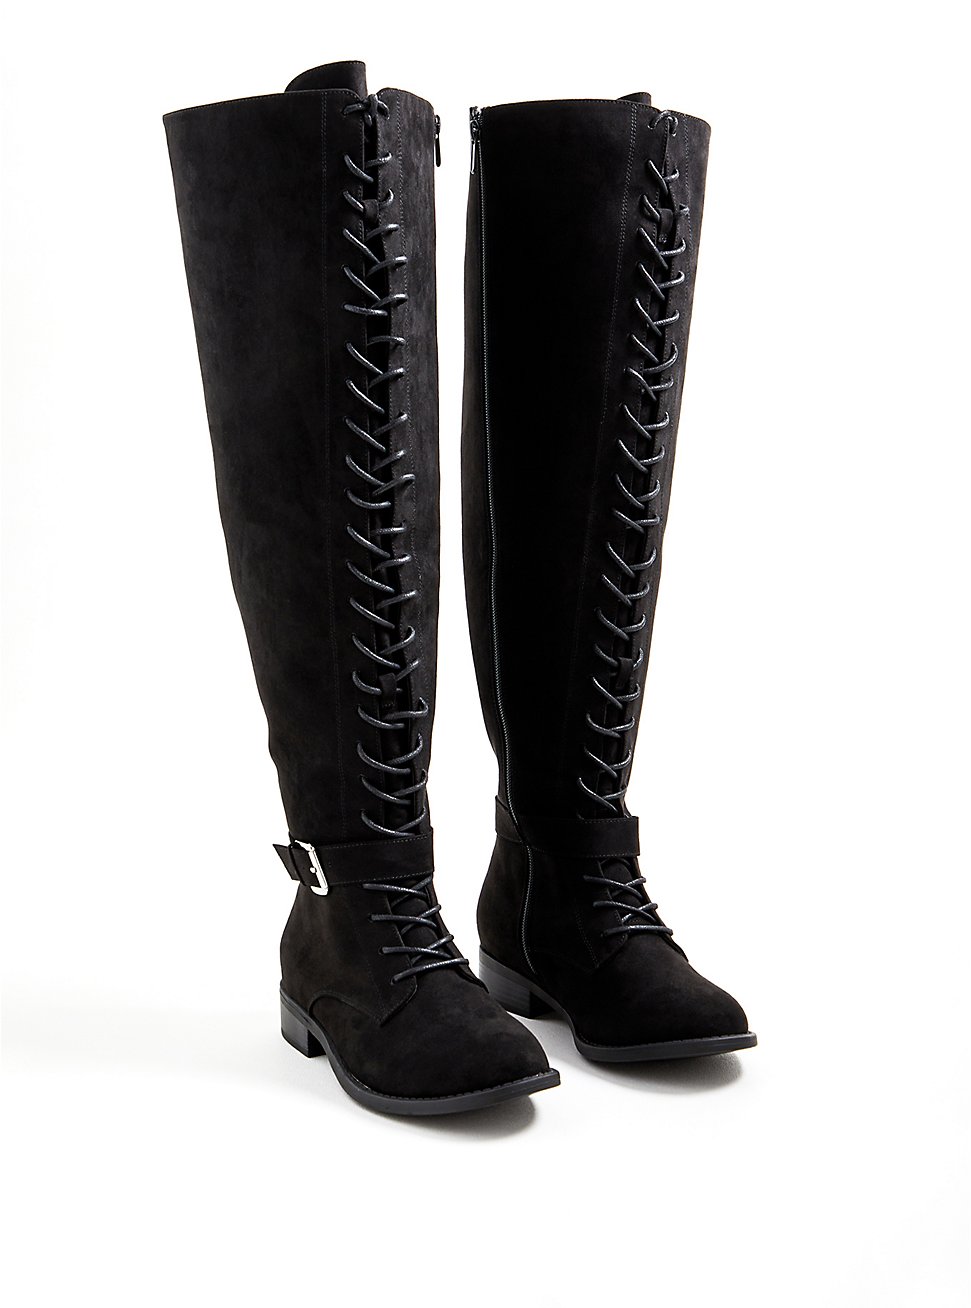 Plus Size Double Buckle Over The Knee Boot - Faux Suede Black (WW), BLACK, hi-res